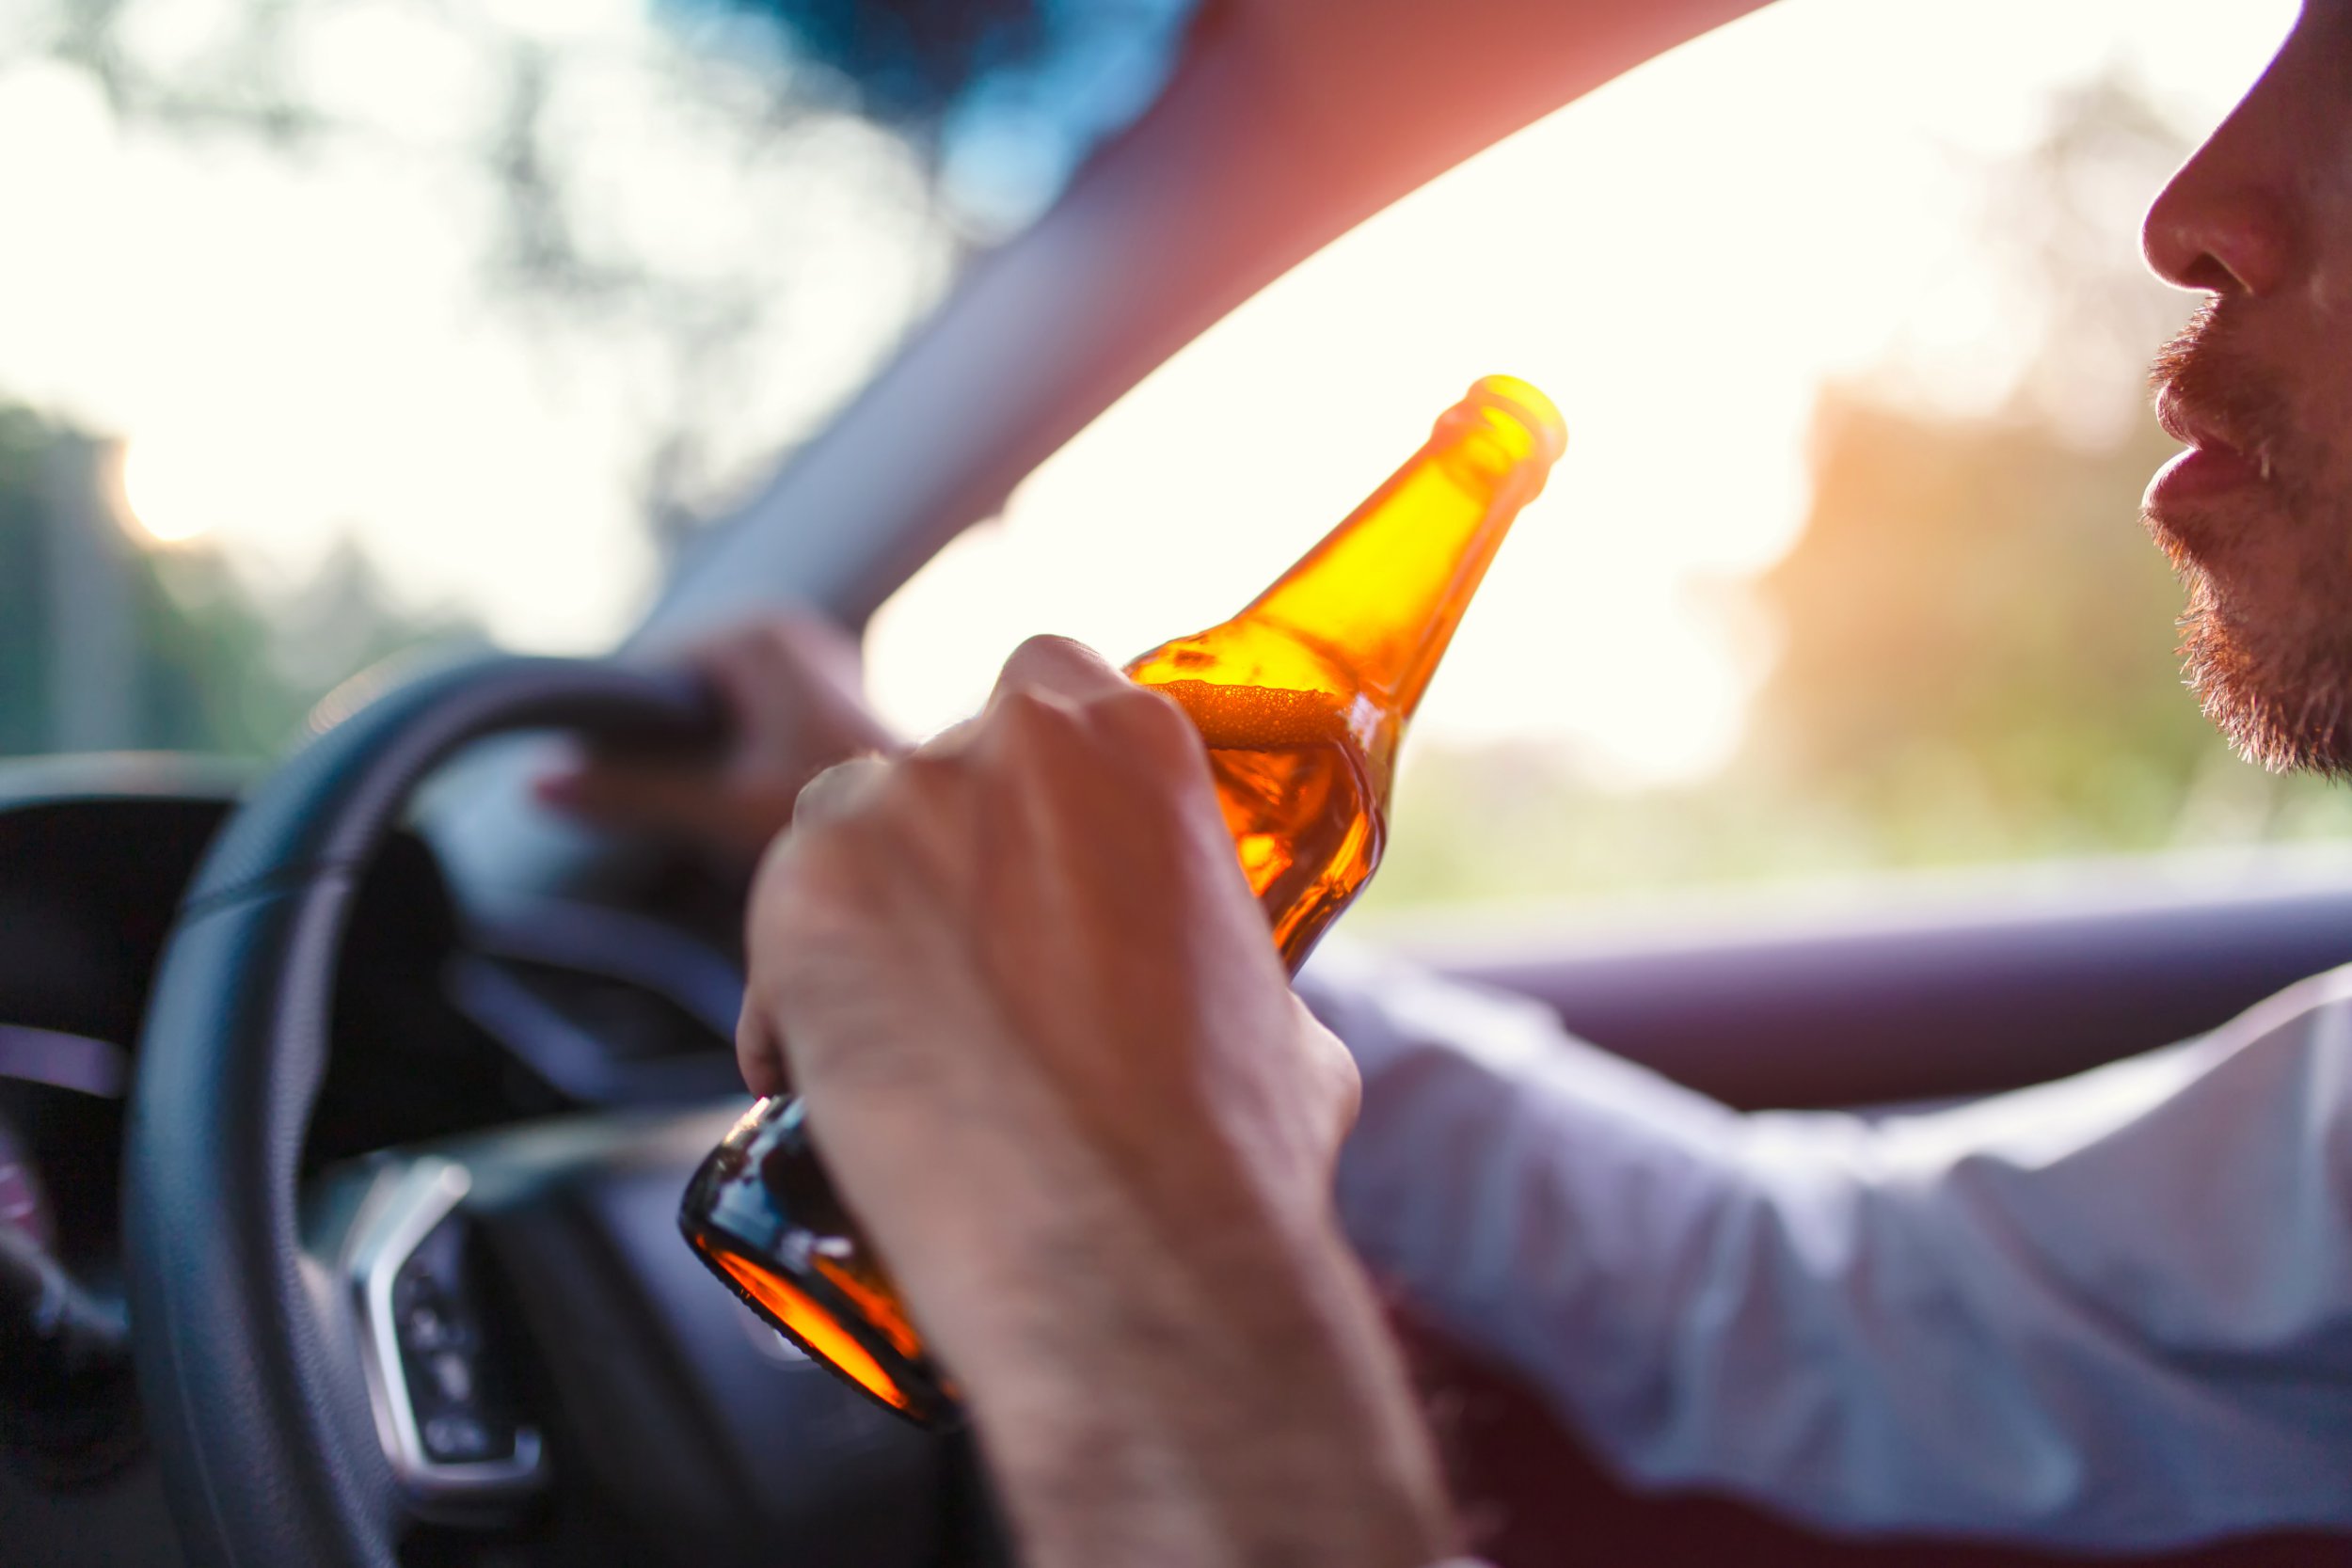 Can I have open alcohol in my car?